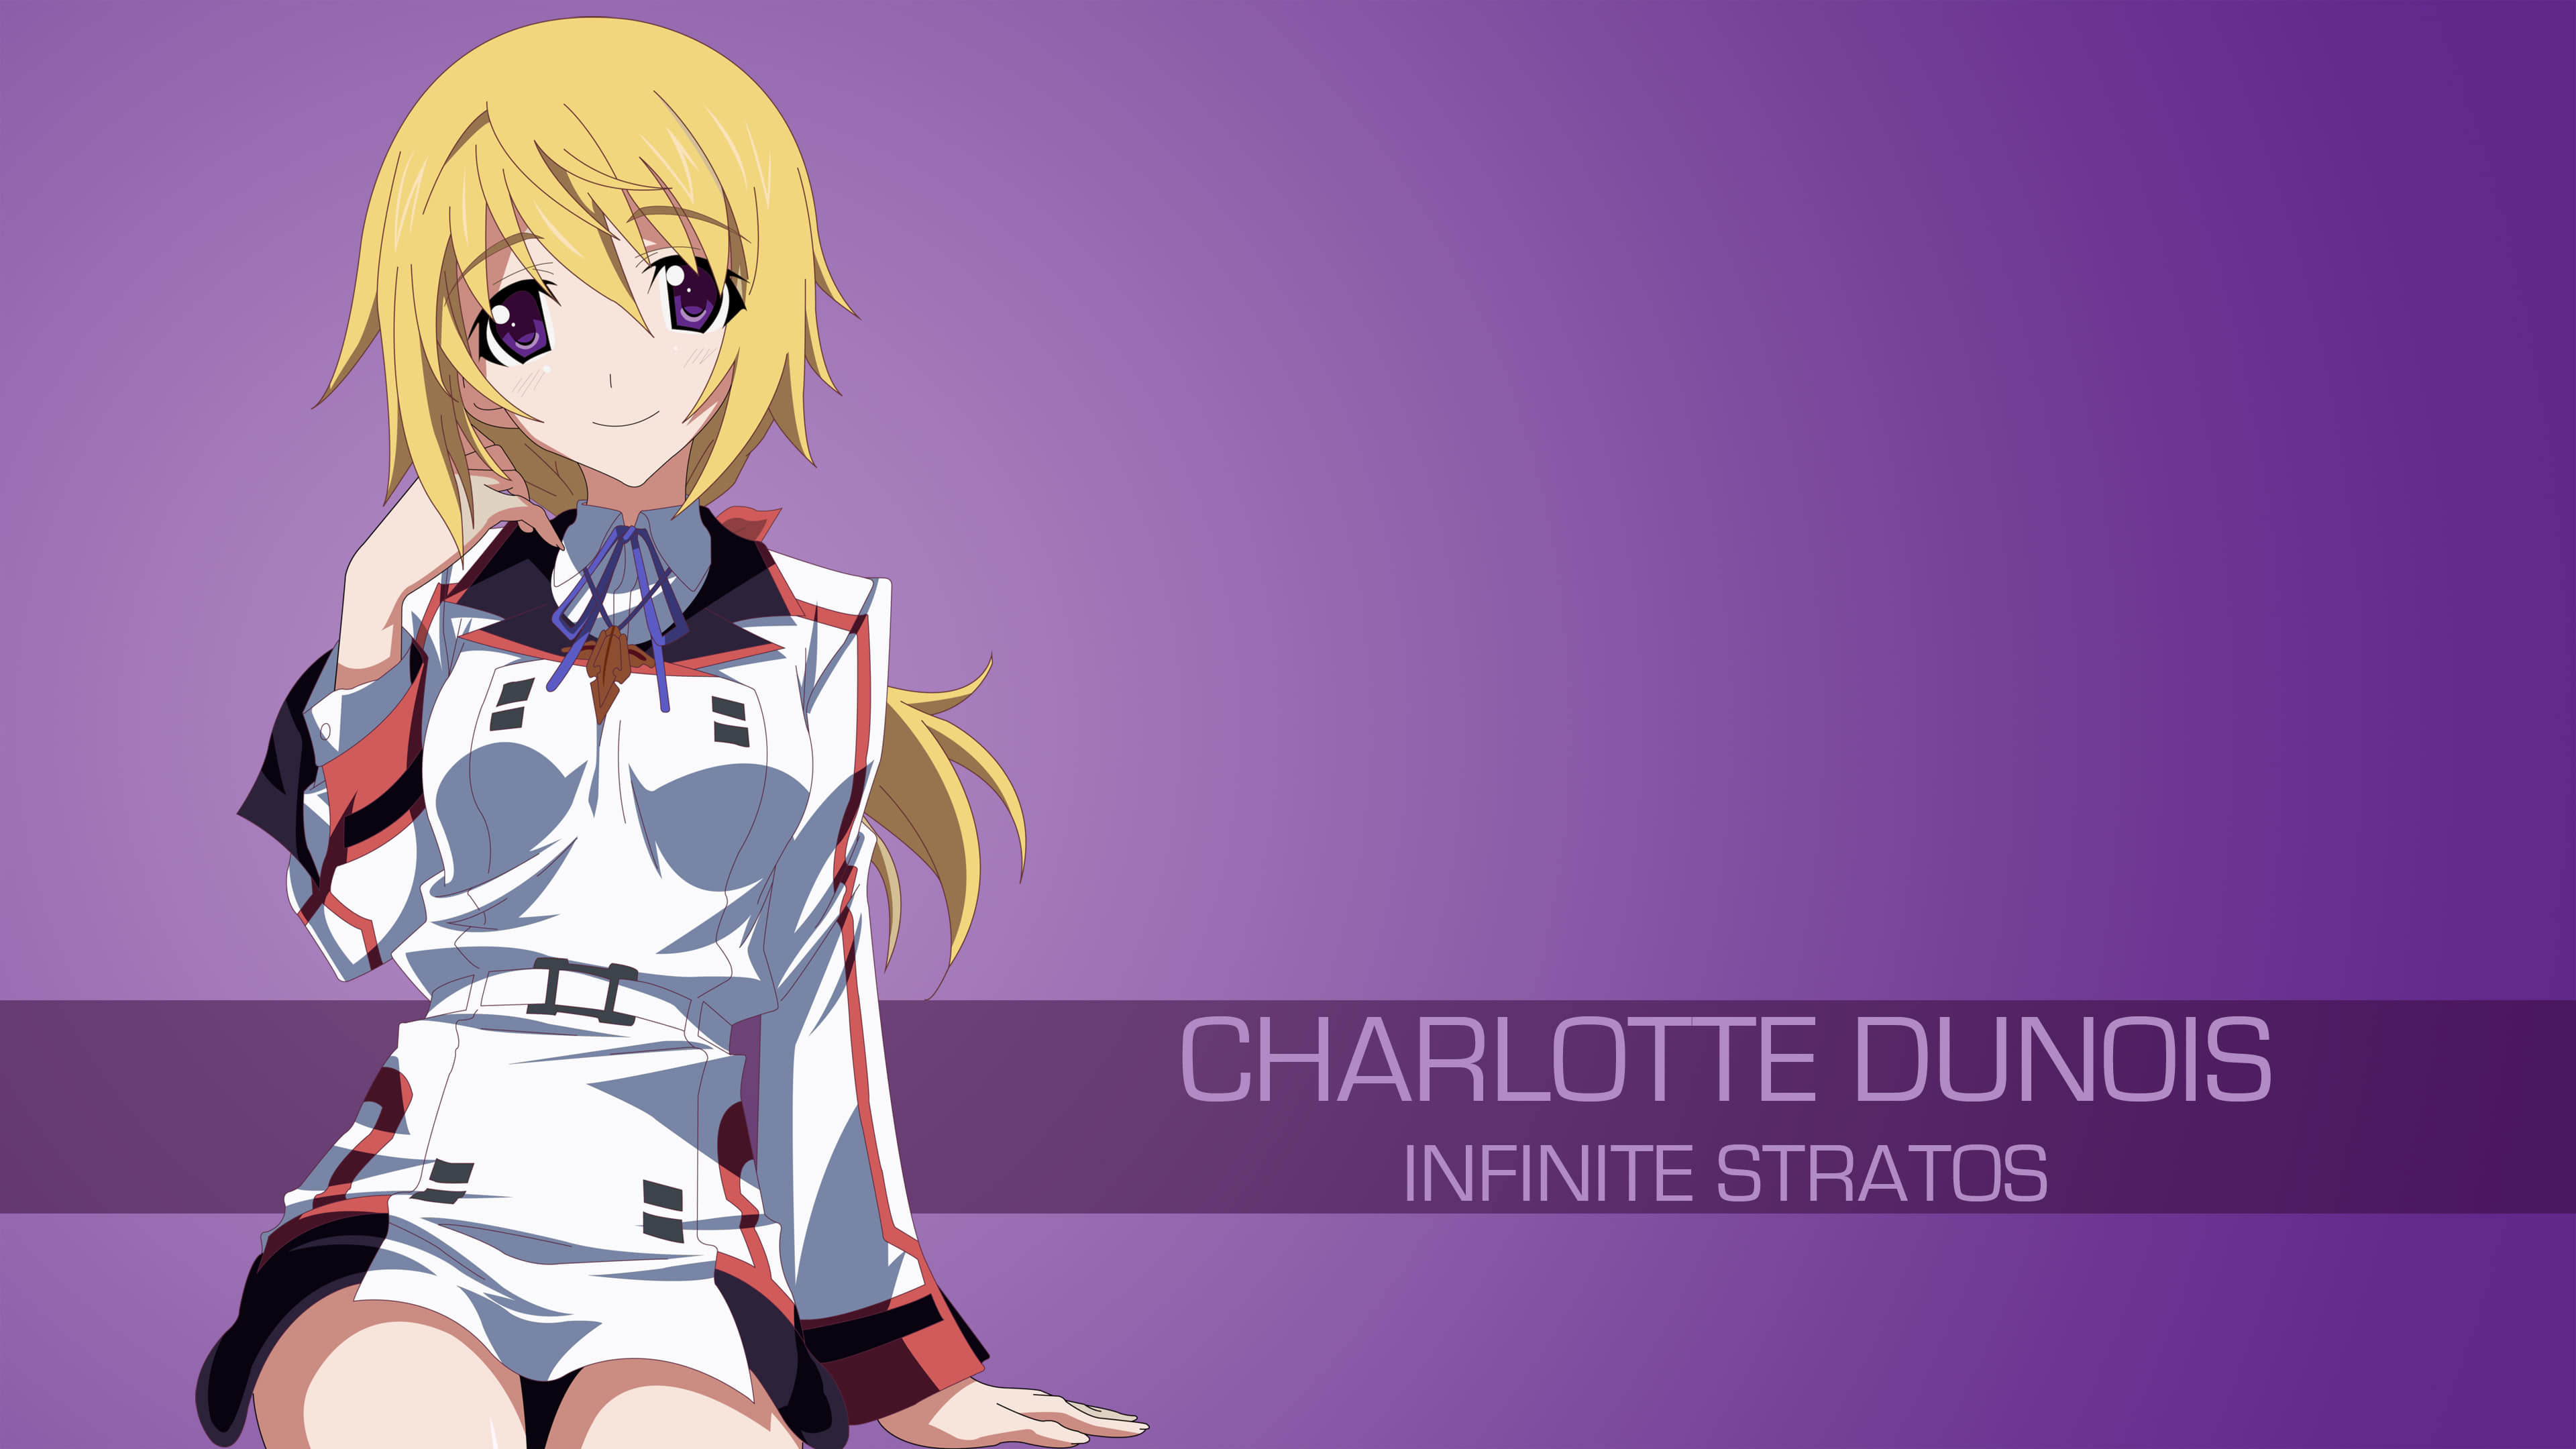 Charlotte Wallpapers